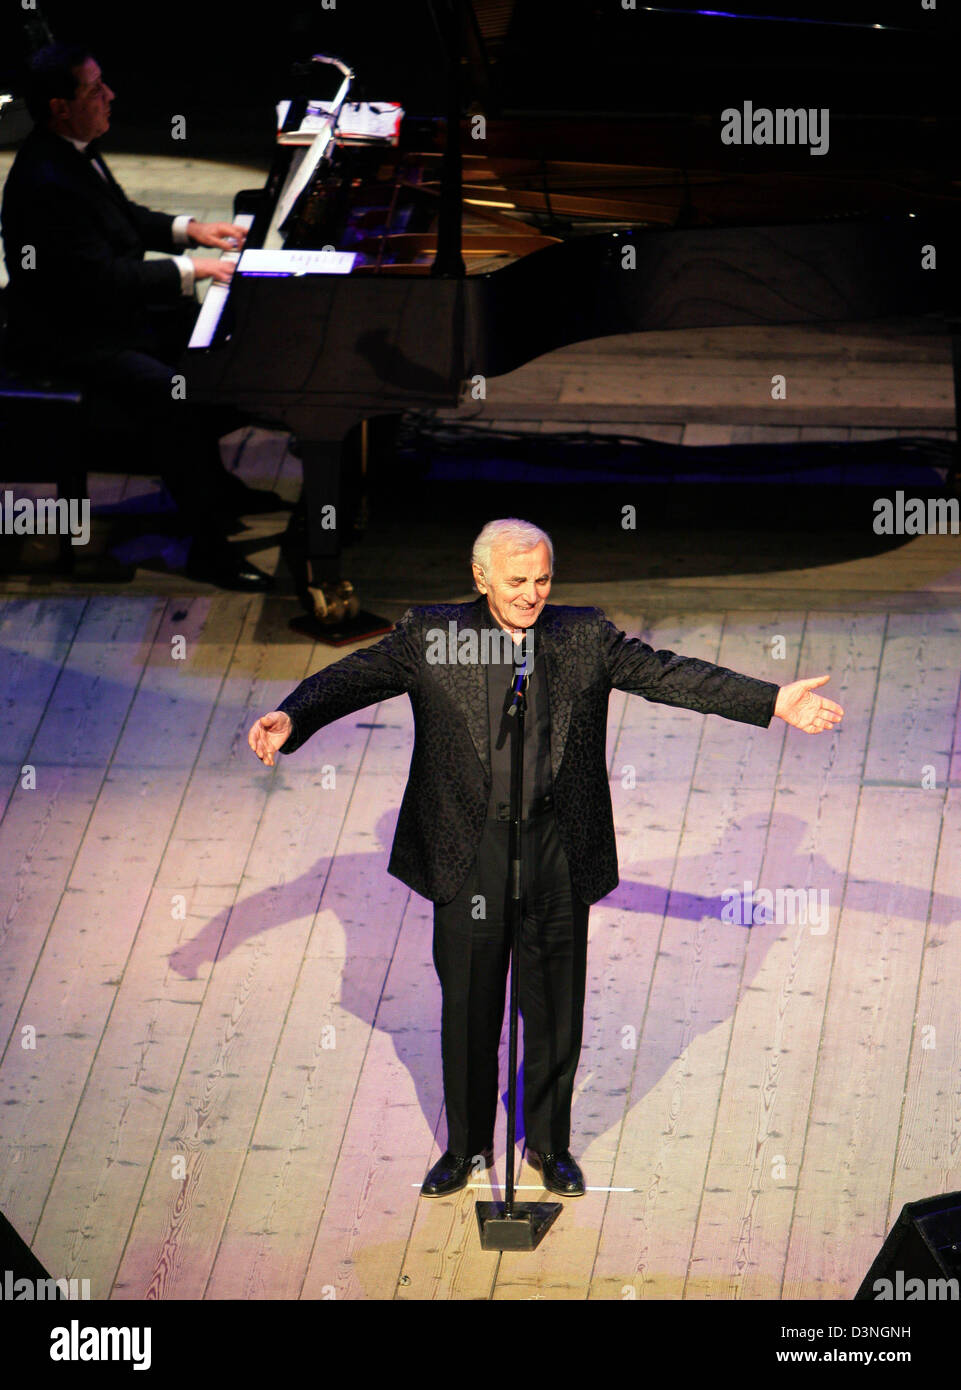 Charles Aznavour photograhed during his performance at the event 'Soiree de  Gala au Chateau de Versailles', Versailles, France, Monday 30.01.2006. The  proceeds of the gala will be donated to the French cancer